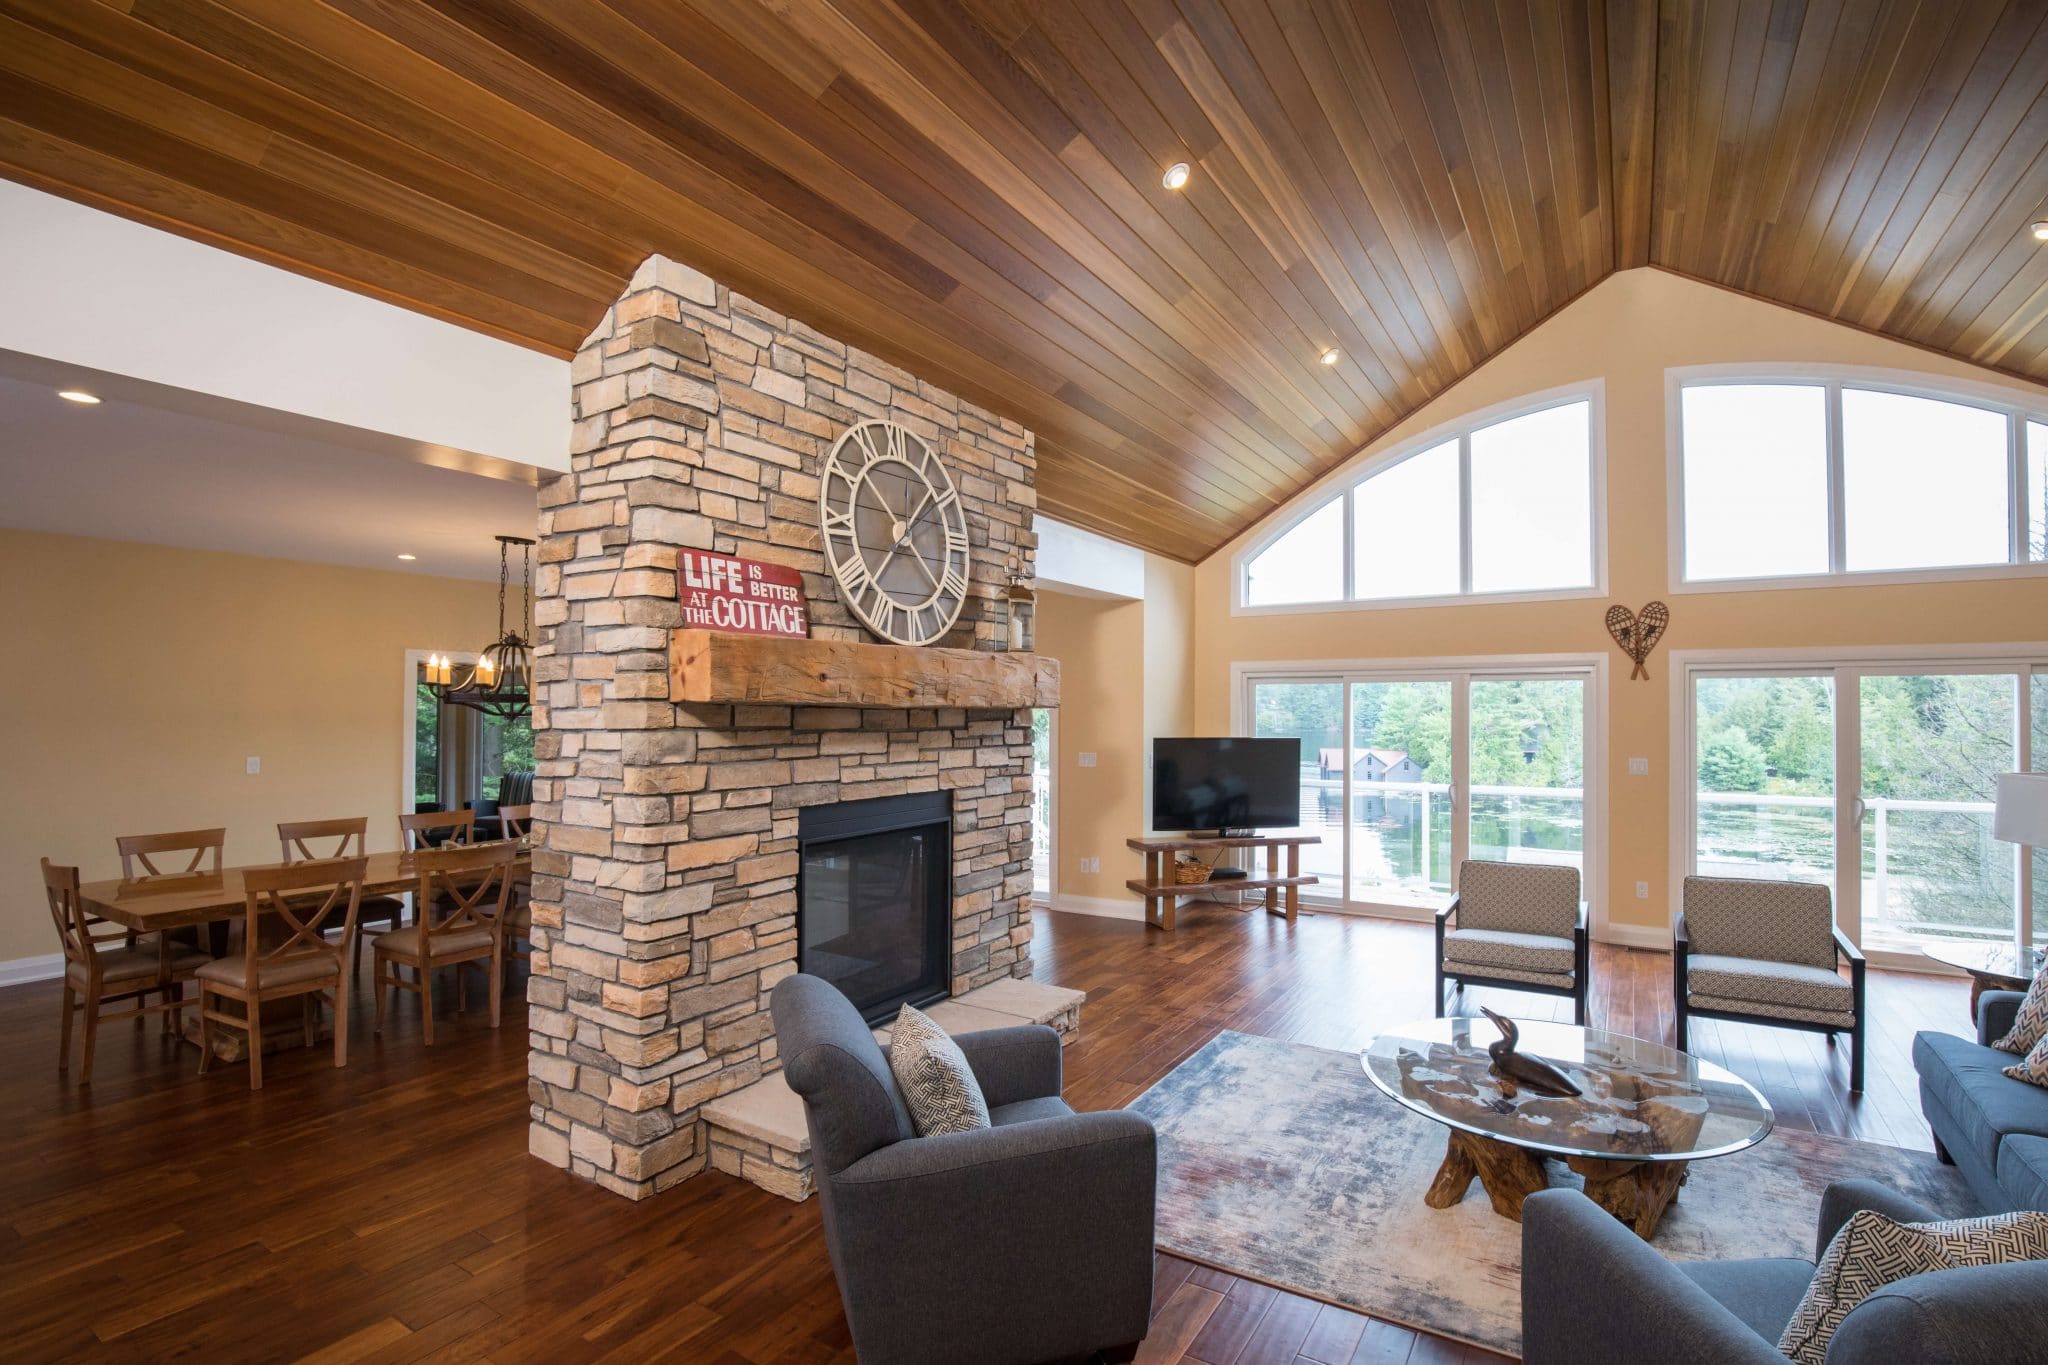 3 Steps for Choosing the Perfect Fireplace for Your Home